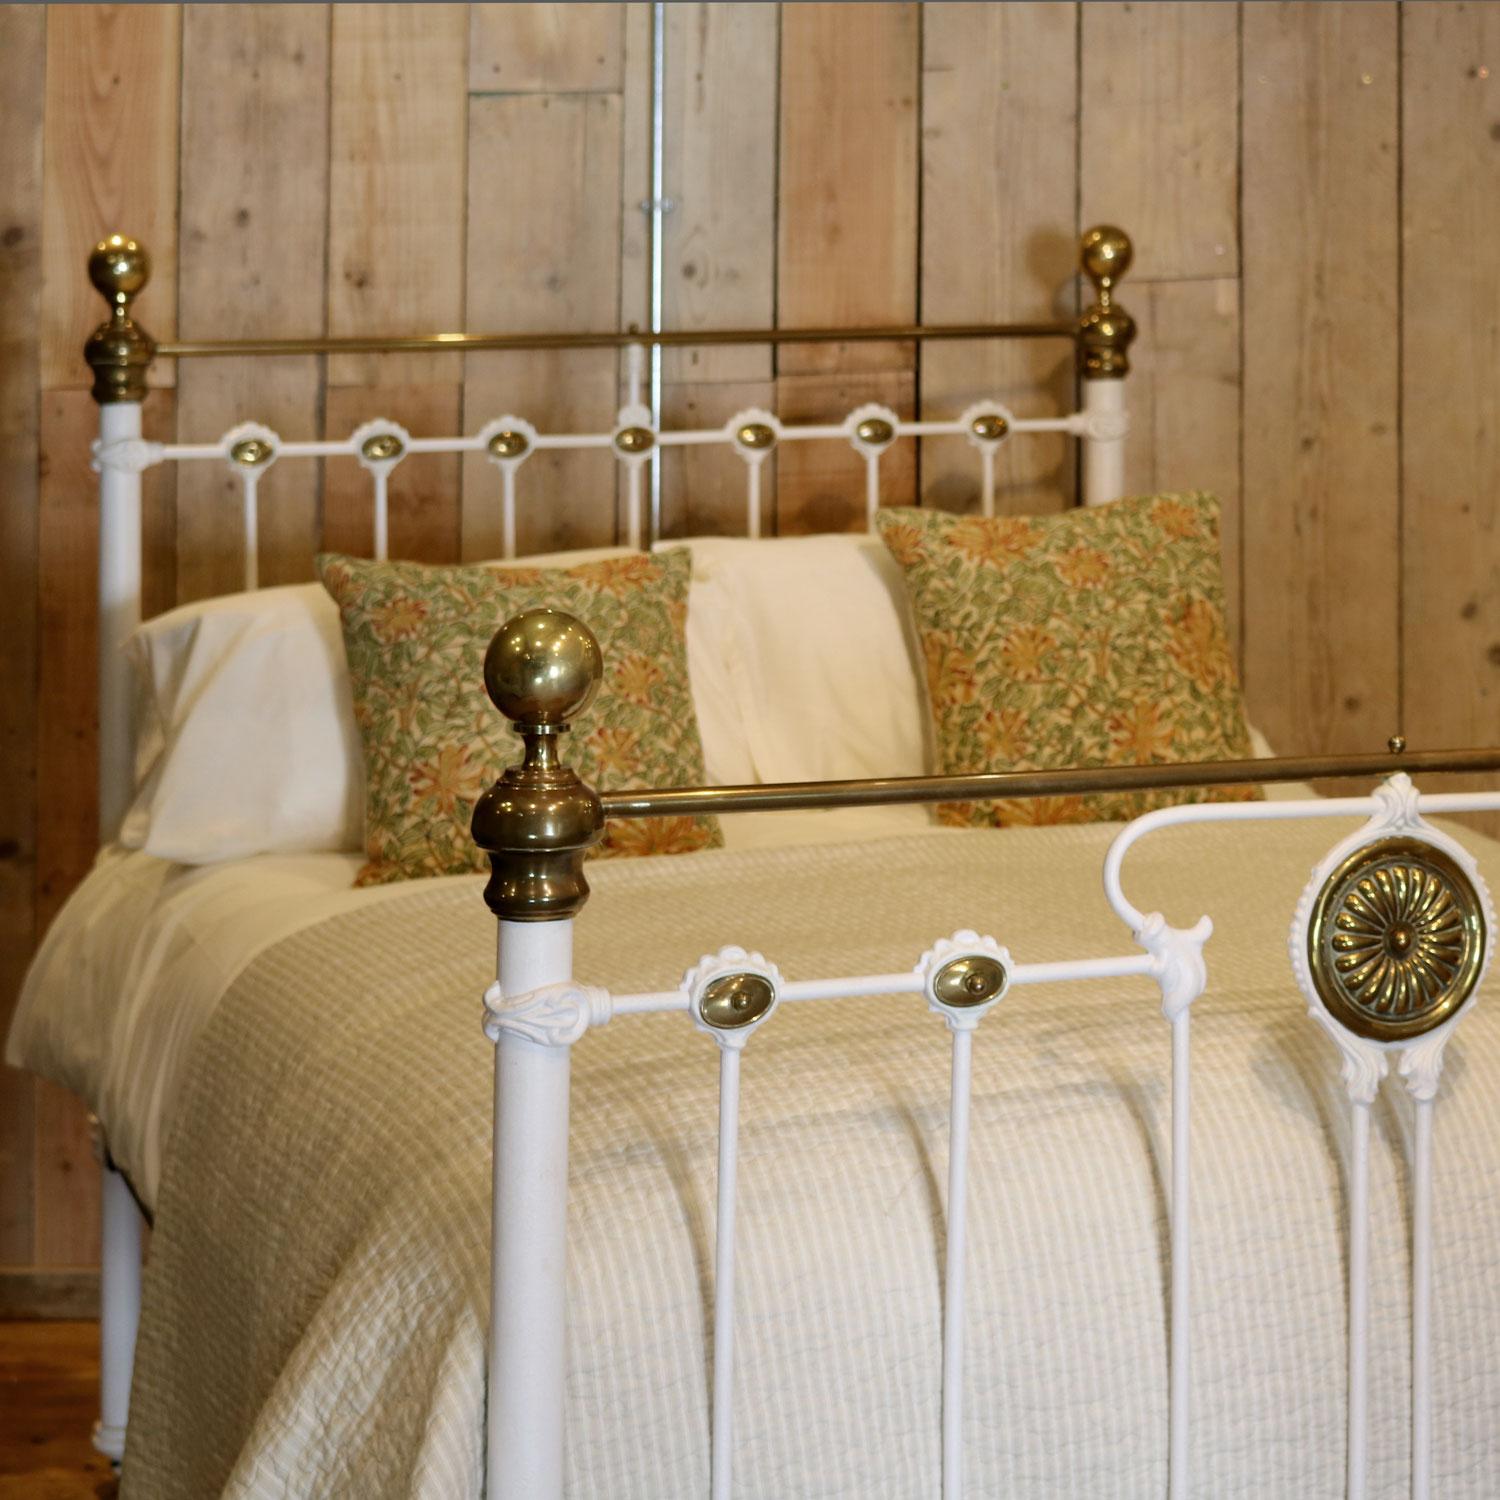 Late Victorian brass and cast iron bedstead, finished in cream with straight brass top rail and striking brass centrepiece in the foot board with a flower design. This bed also has some lovely mouldings with brass detailing throughout. 

This bed